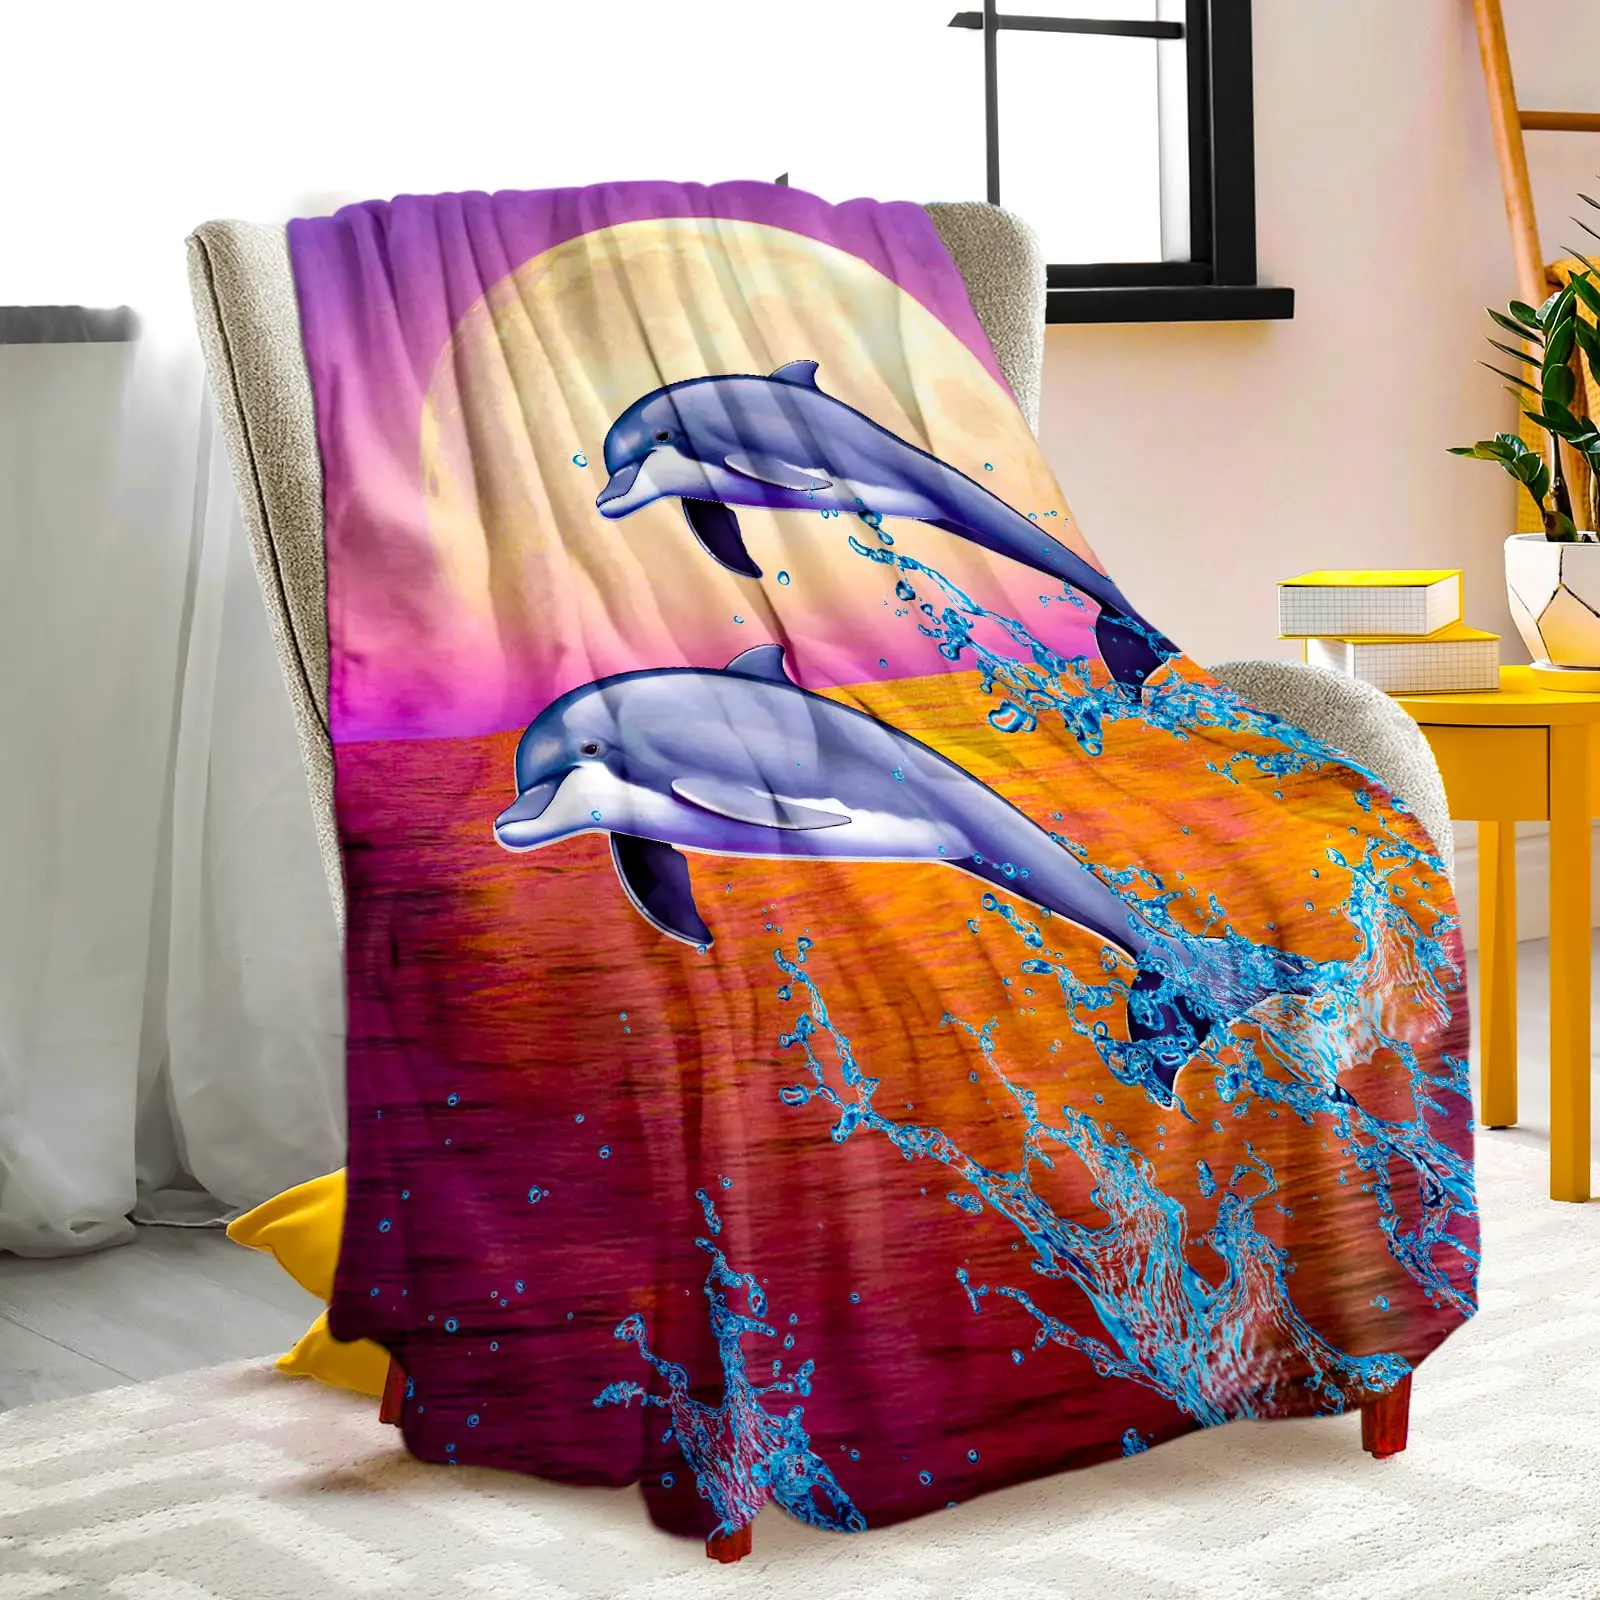 

Cute Bed Sofa Couch Blanket King Queen Size Animal Pattern Dolphin Throw Blanket for Adults Soft Flannel Fleece Warm Lightweight